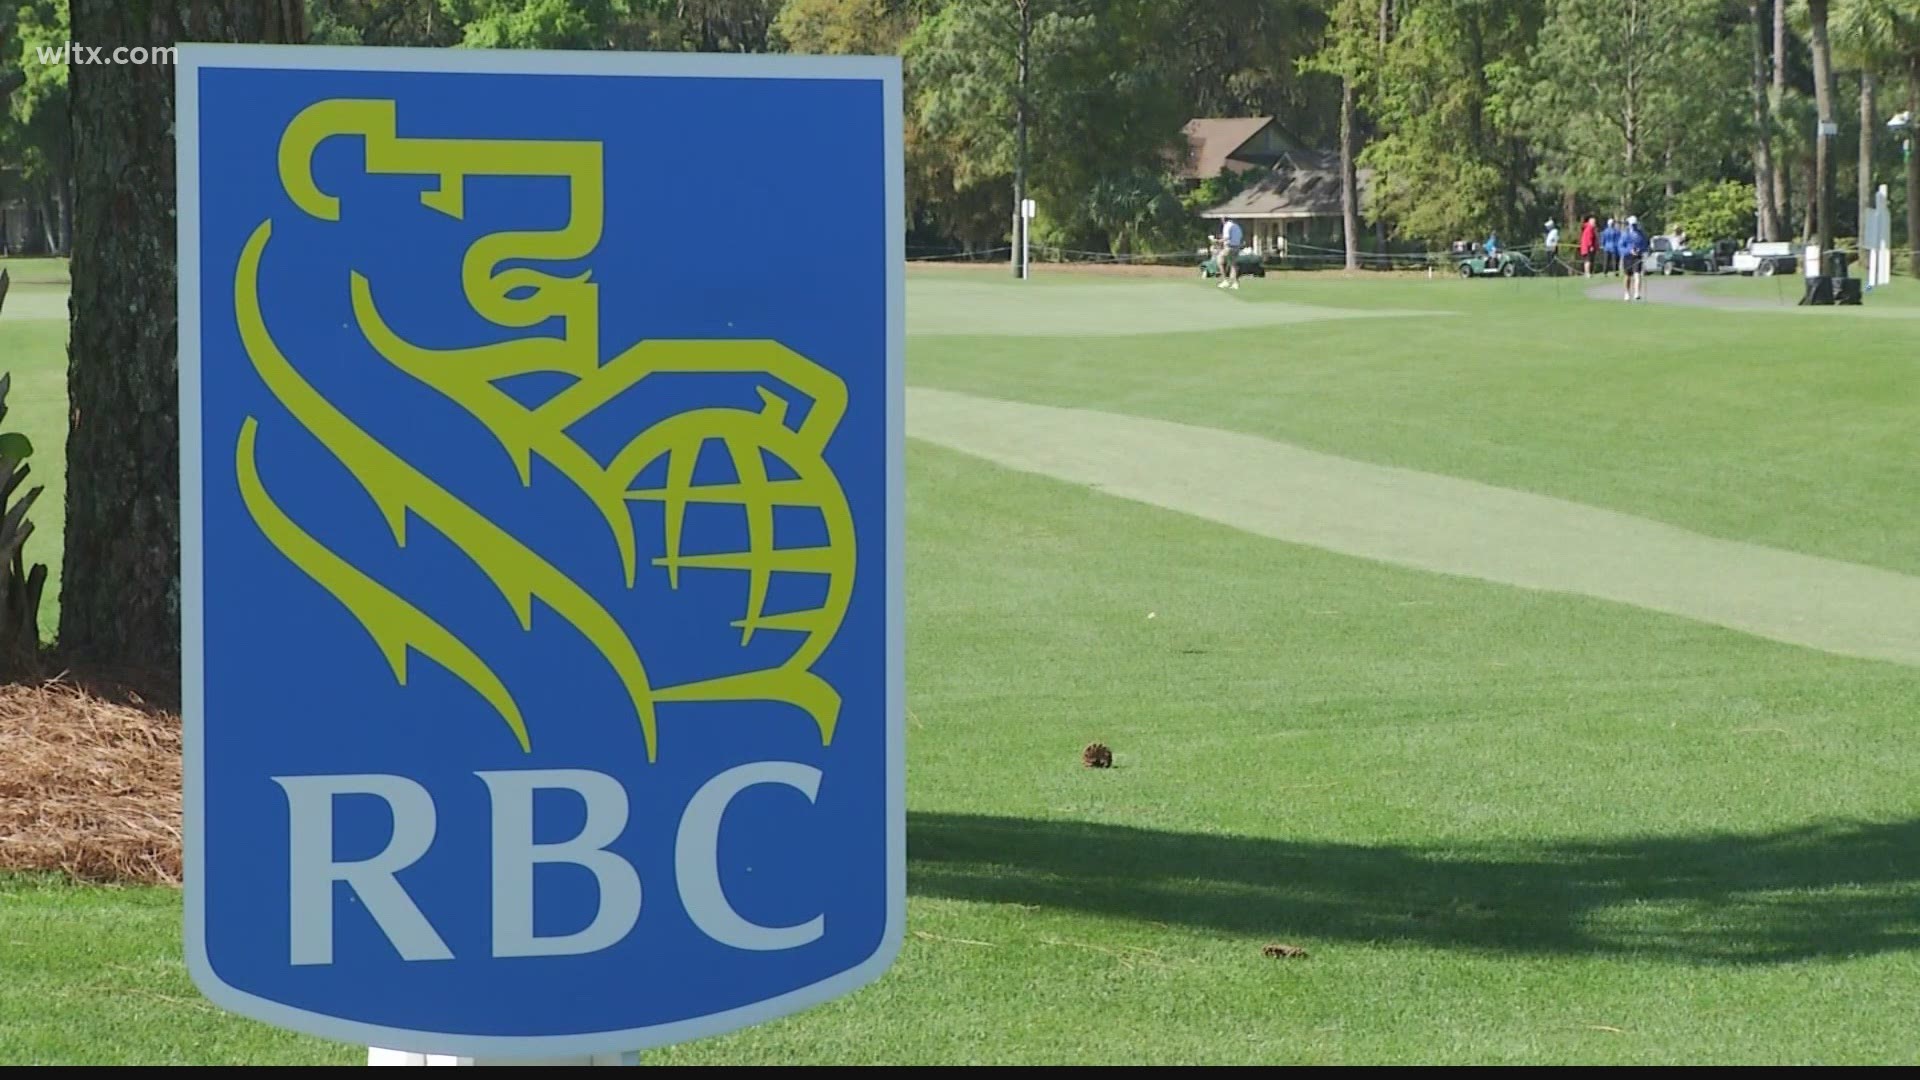 The world's top-ranked golfer returns to the Harbour Town Golf Links for the RBC Heritage